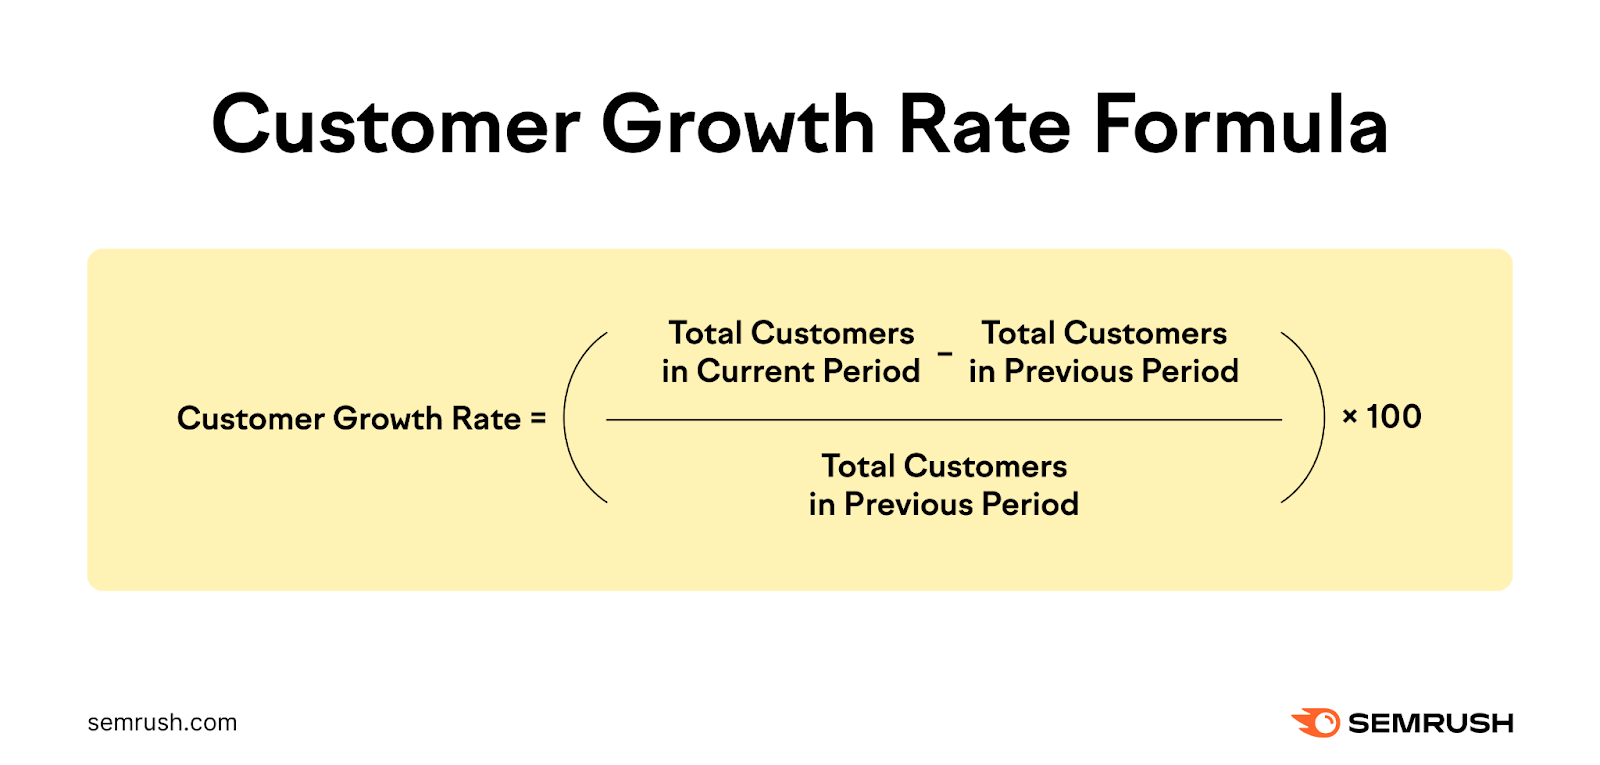 Customer maturation  complaint   equals full   customers successful  existent   play  minus full   customers successful  erstwhile   play  divided by full   customers successful  erstwhile   period, multiplied by 100.